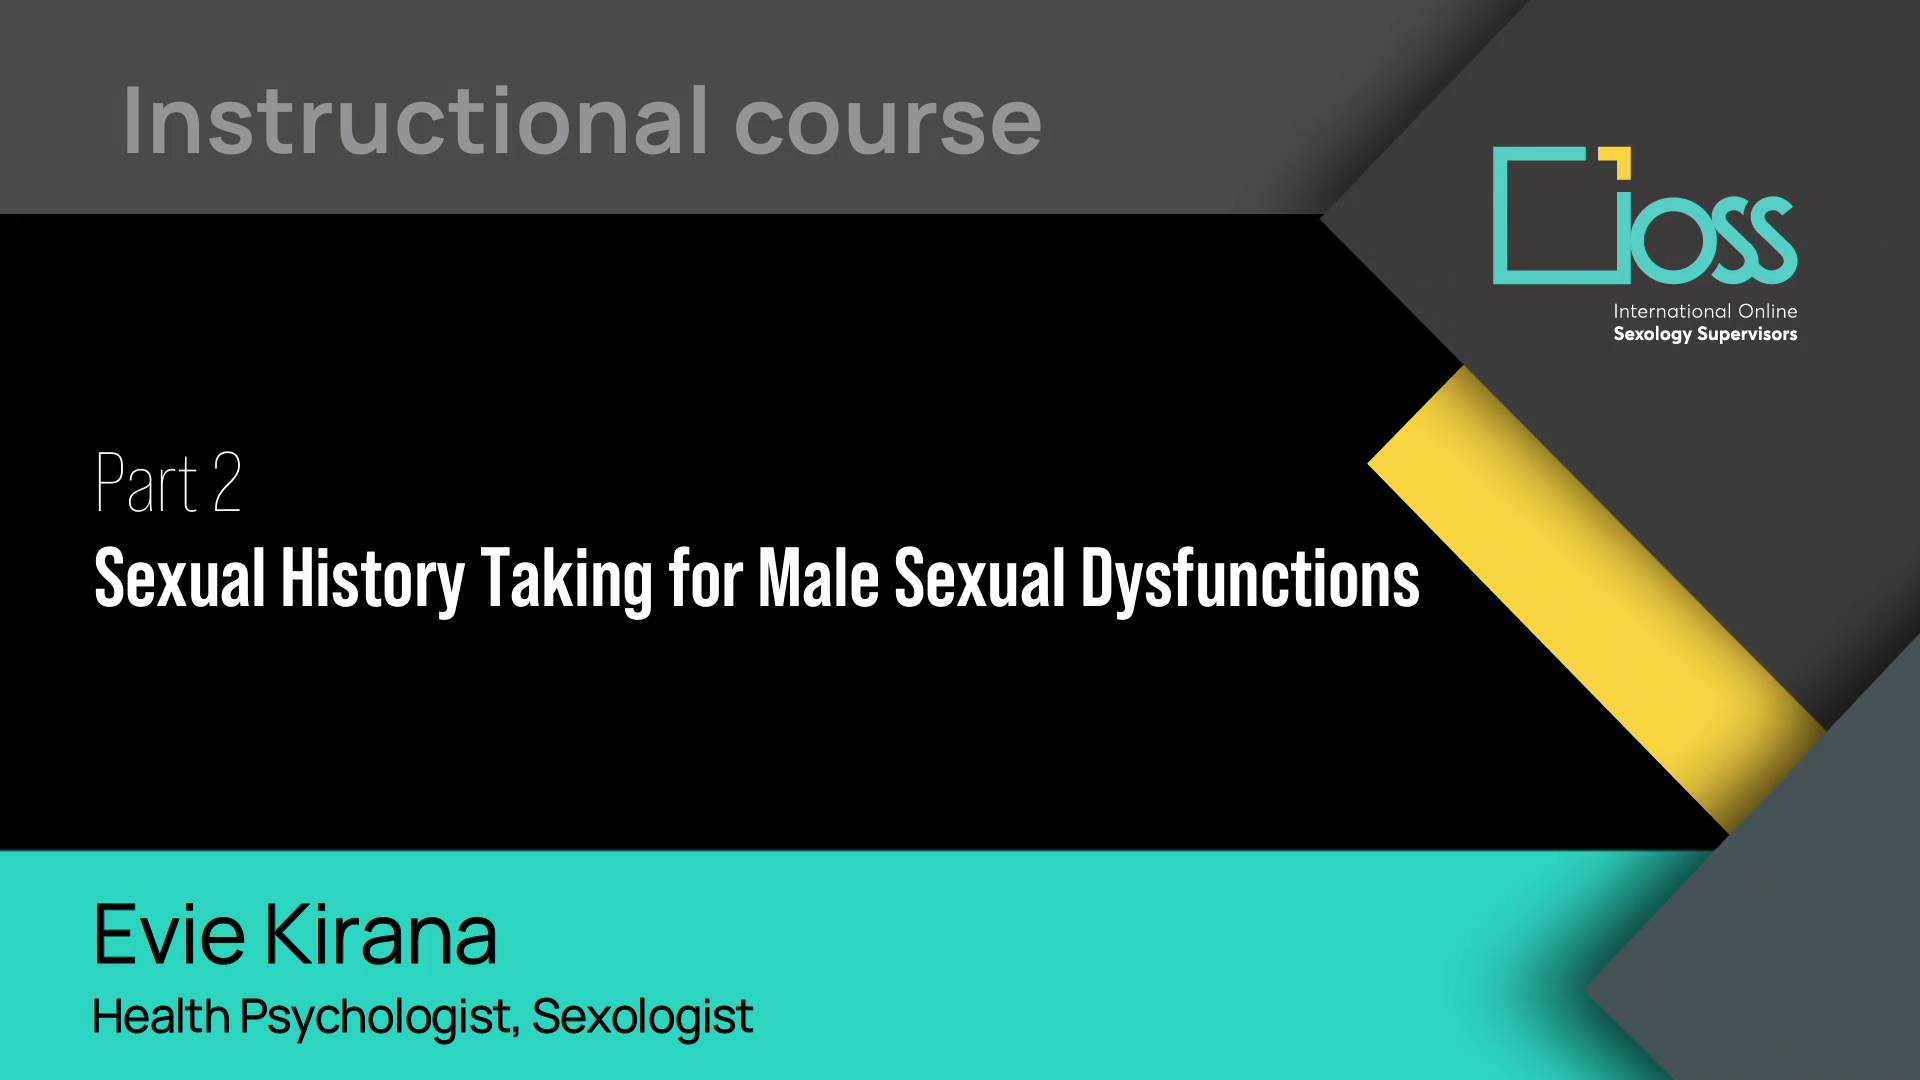 Part 2 Sexual History Taking for Male Sexual Dysfunctions (Part 1 & 2)